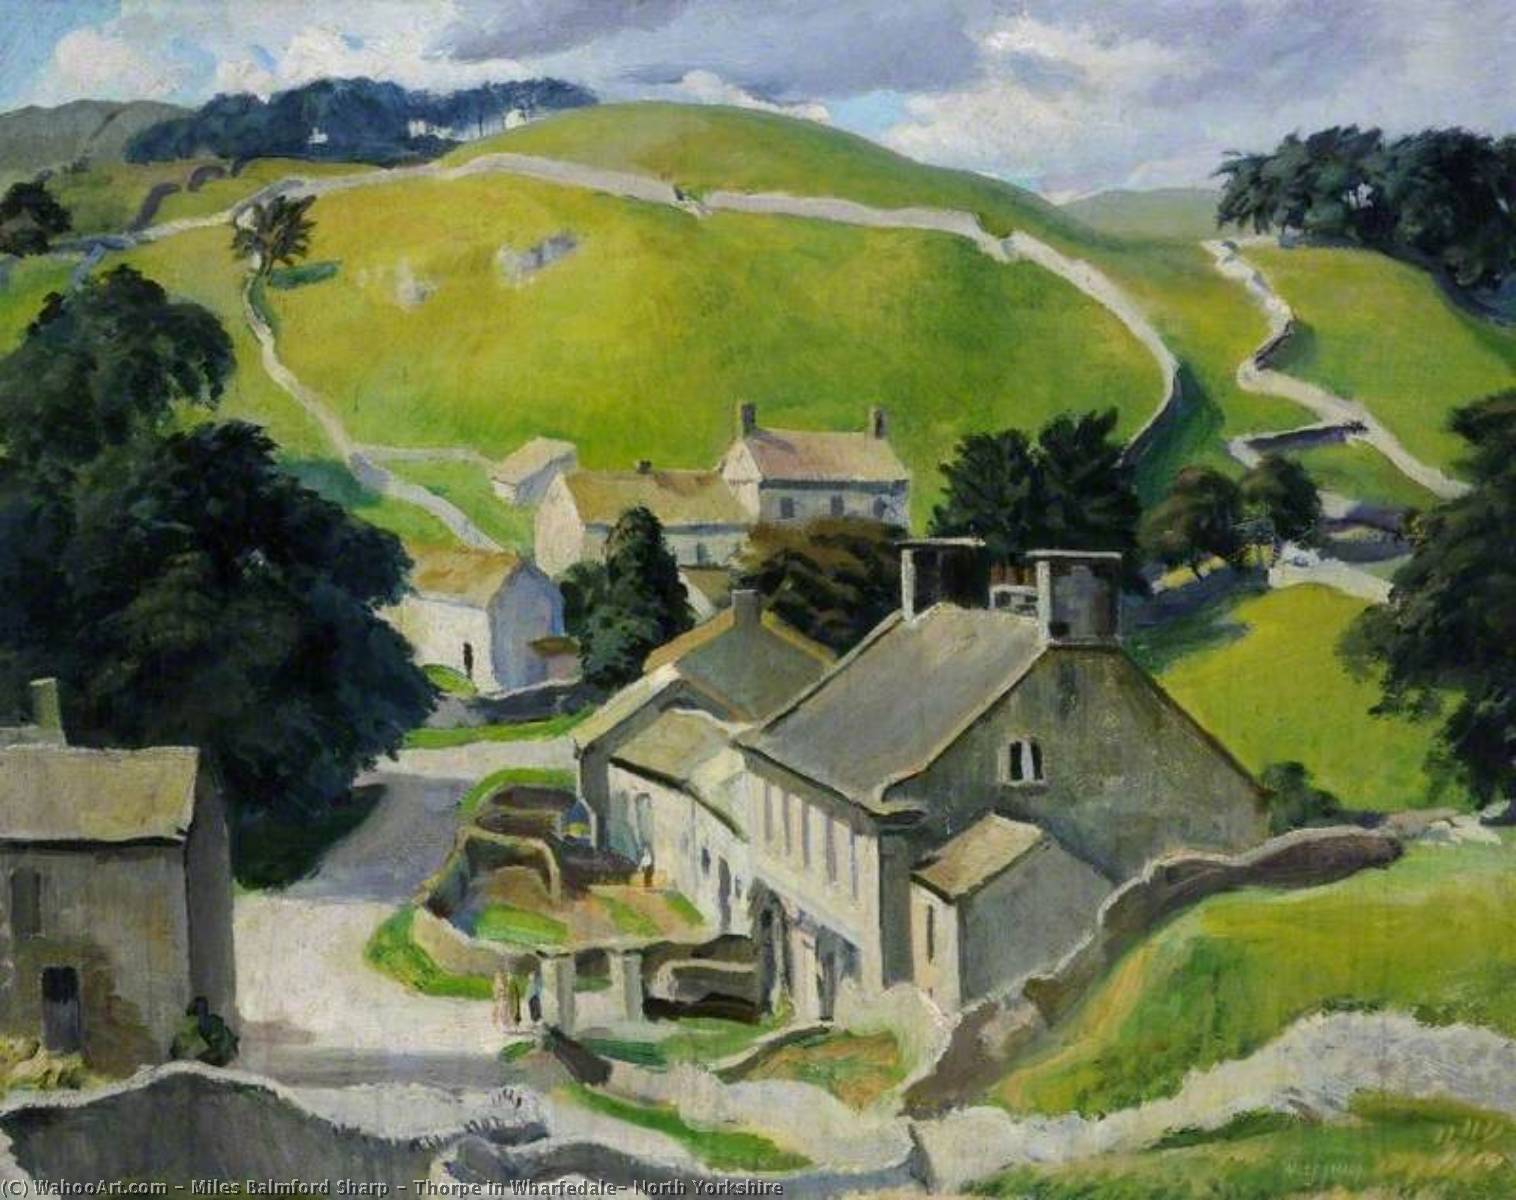 Thorpe in Wharfedale, North Yorkshire, 1940 by Miles Balmford Sharp Miles Balmford Sharp | ArtsDot.com